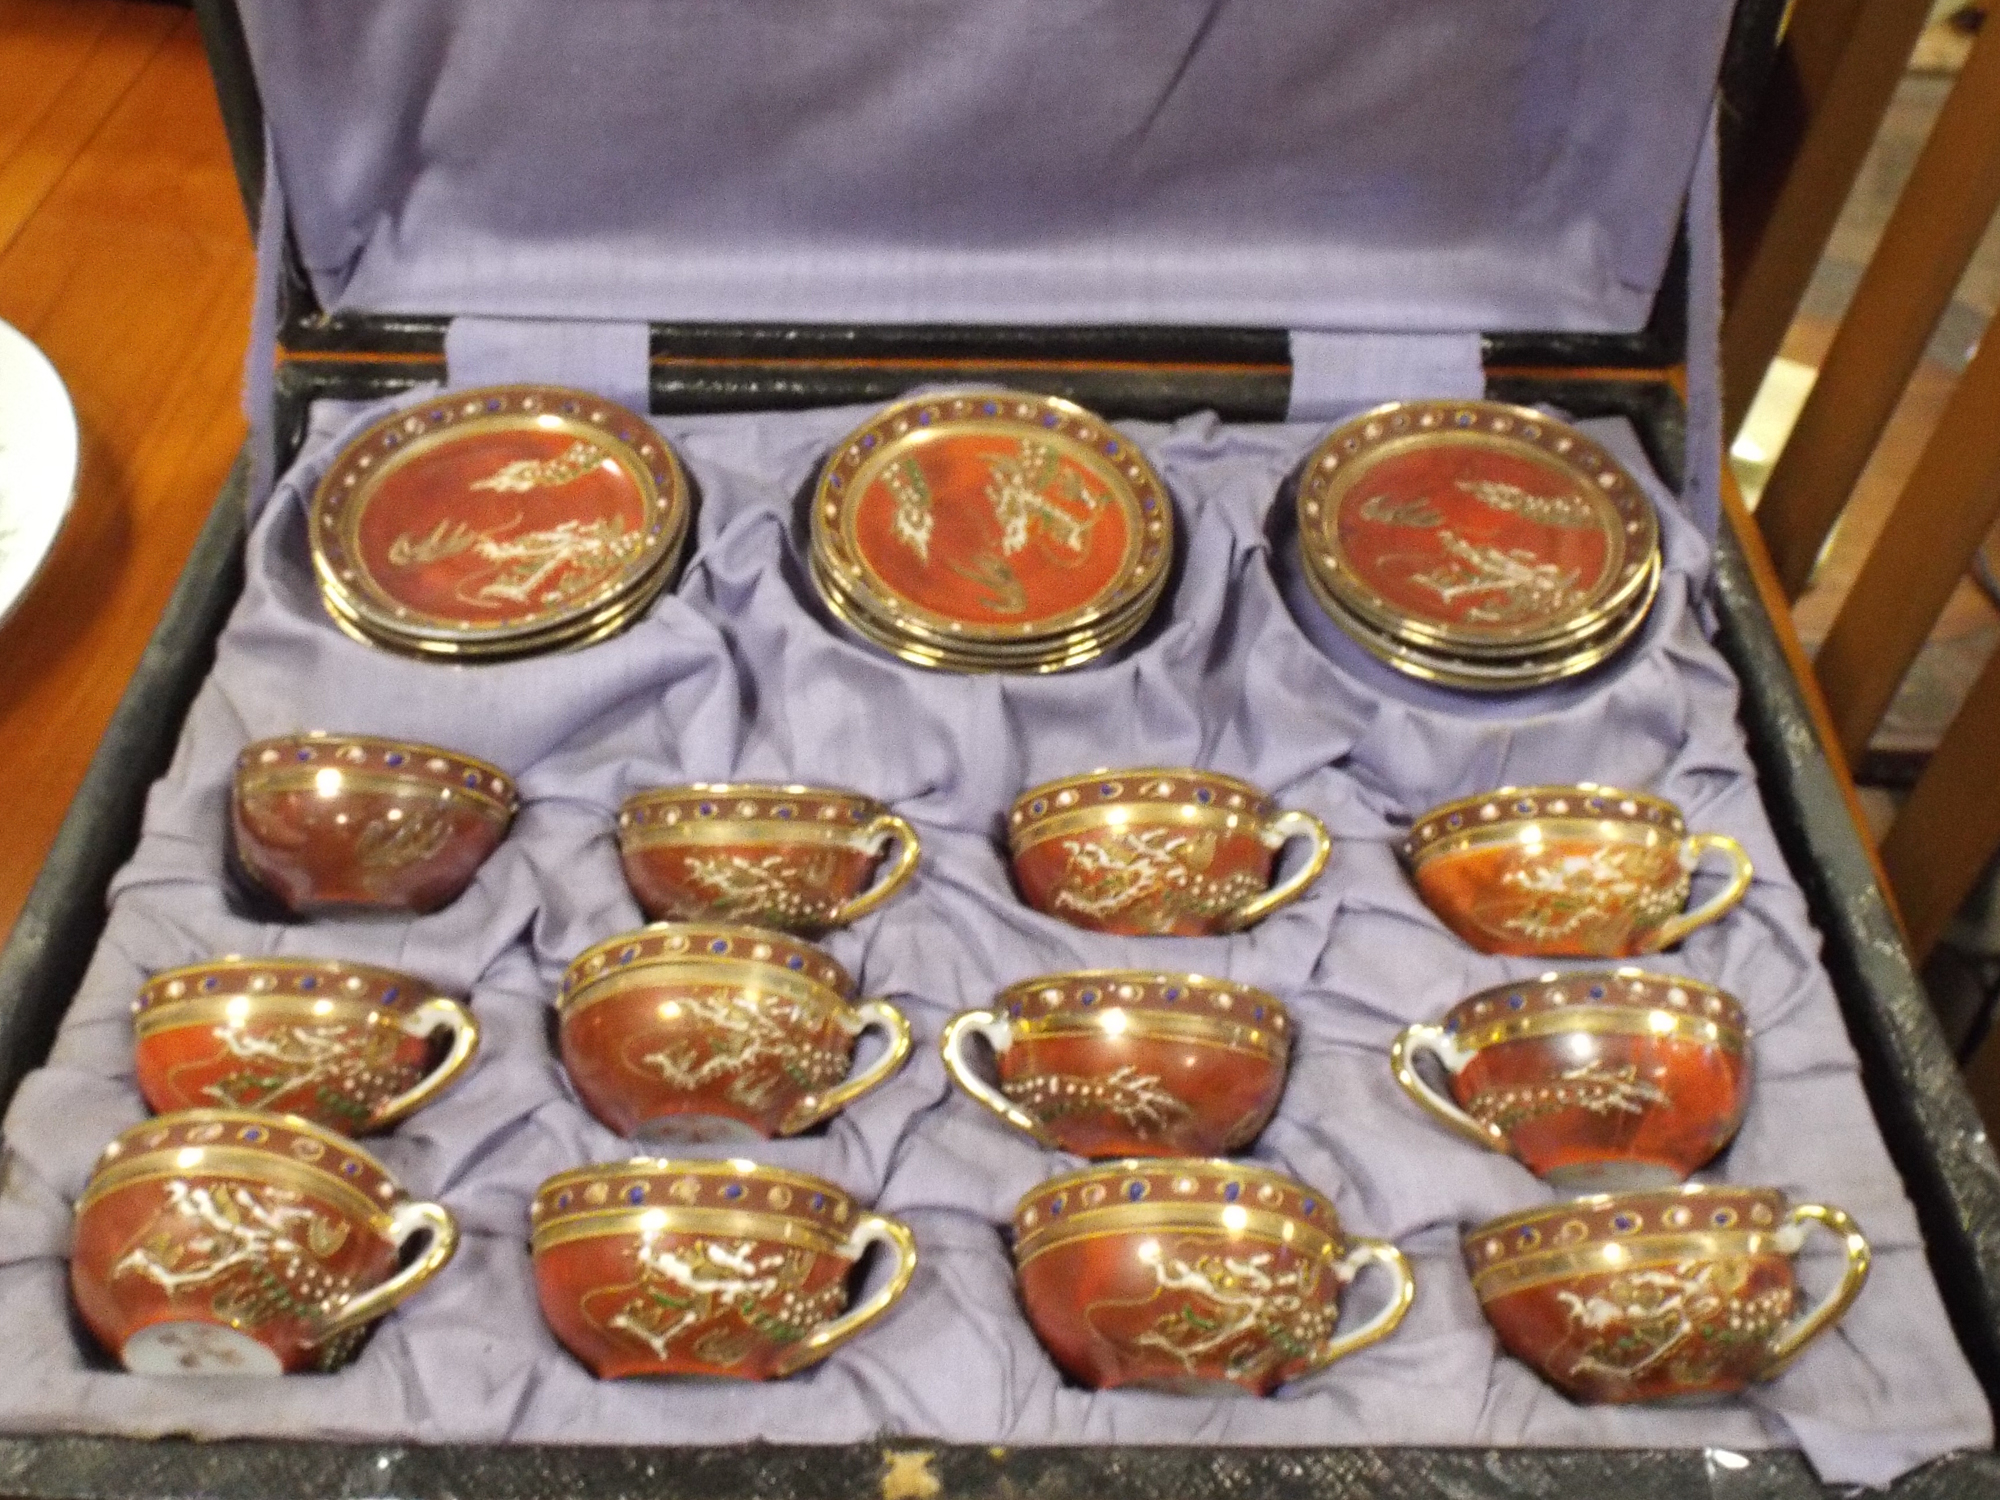 A Japanese Satsuma coffee set of 12 cups and 12 saucers in case